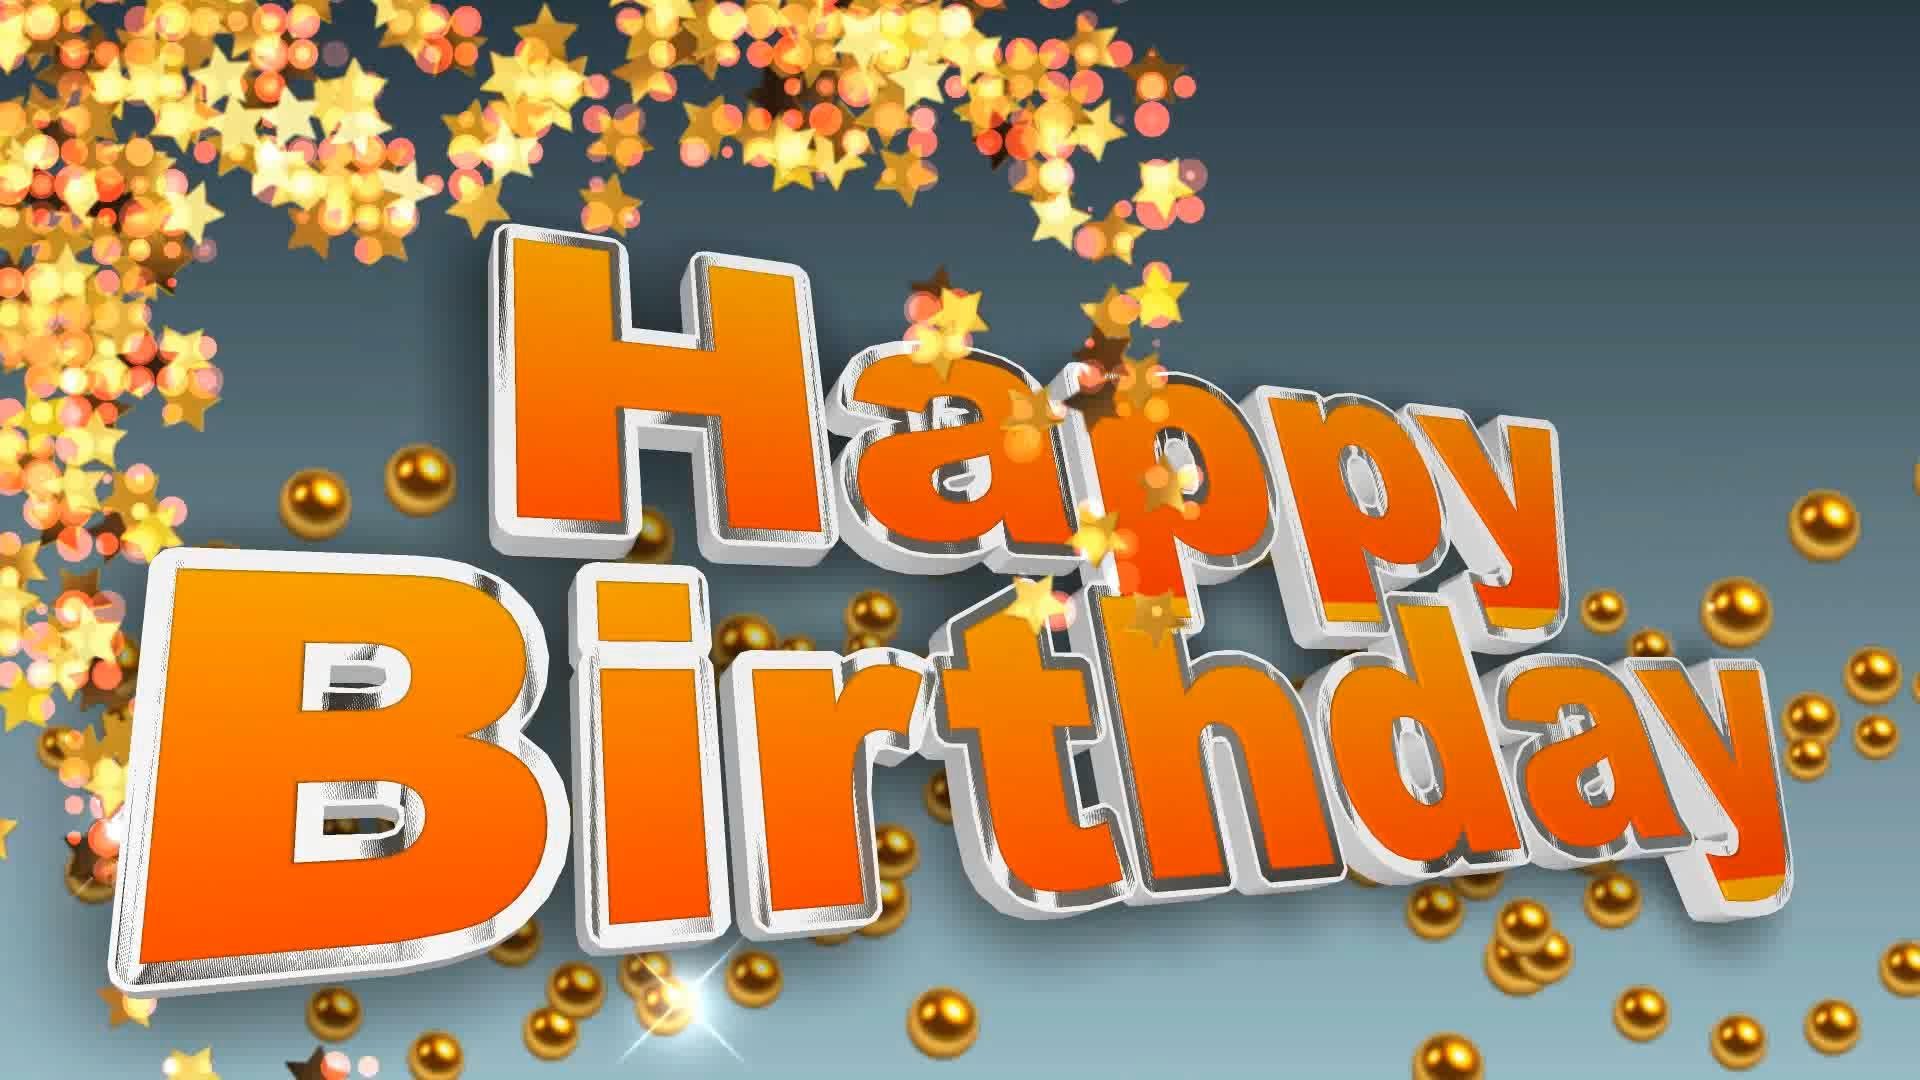 Happy Birthday Wallpapers| Birthday Wishes Pics - 9to5 Car Wallpapers